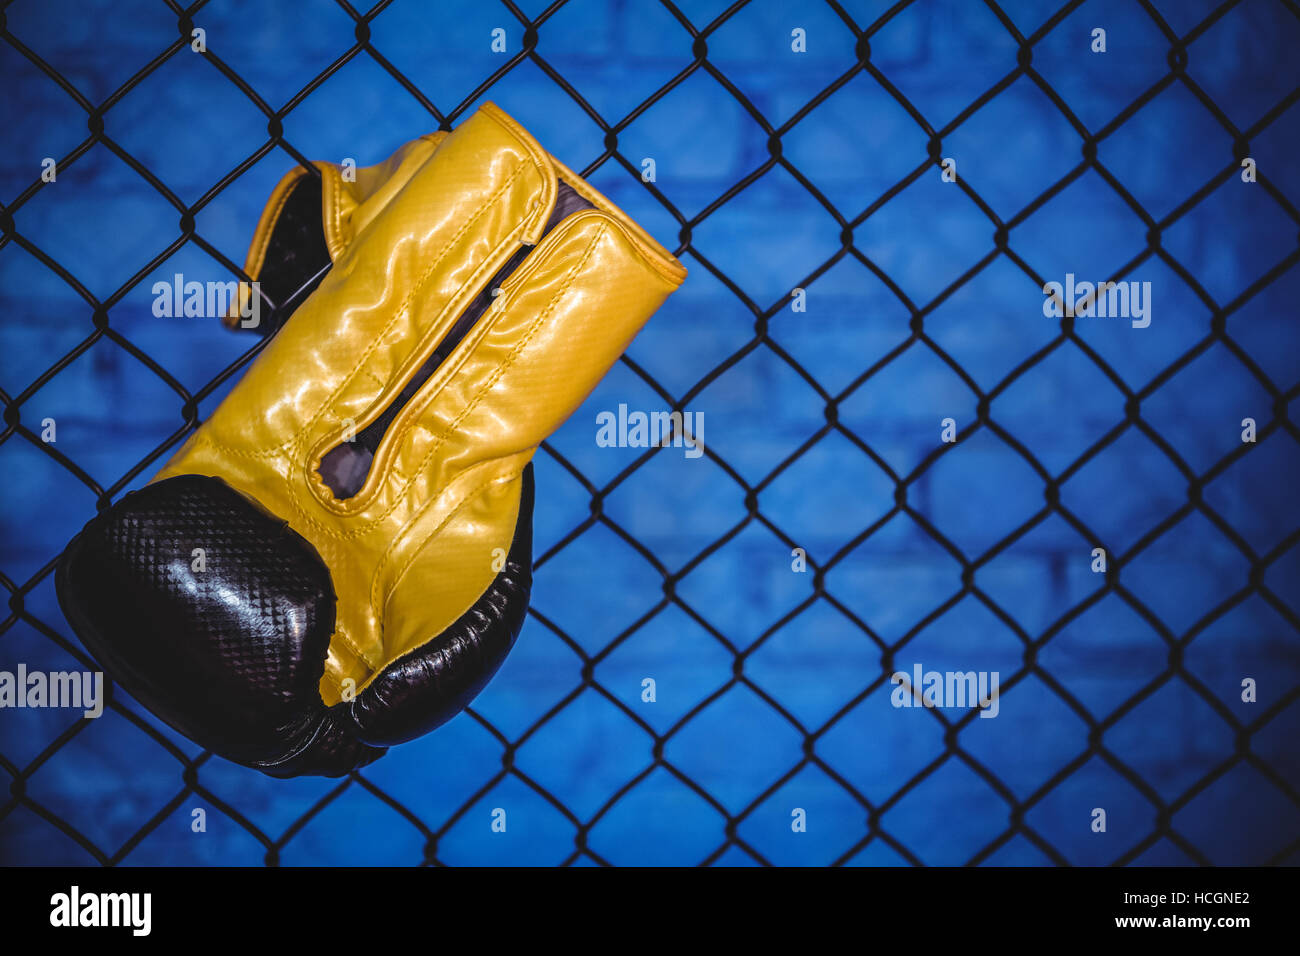 Boxing glove hanging on wire mesh fence Stock Photo